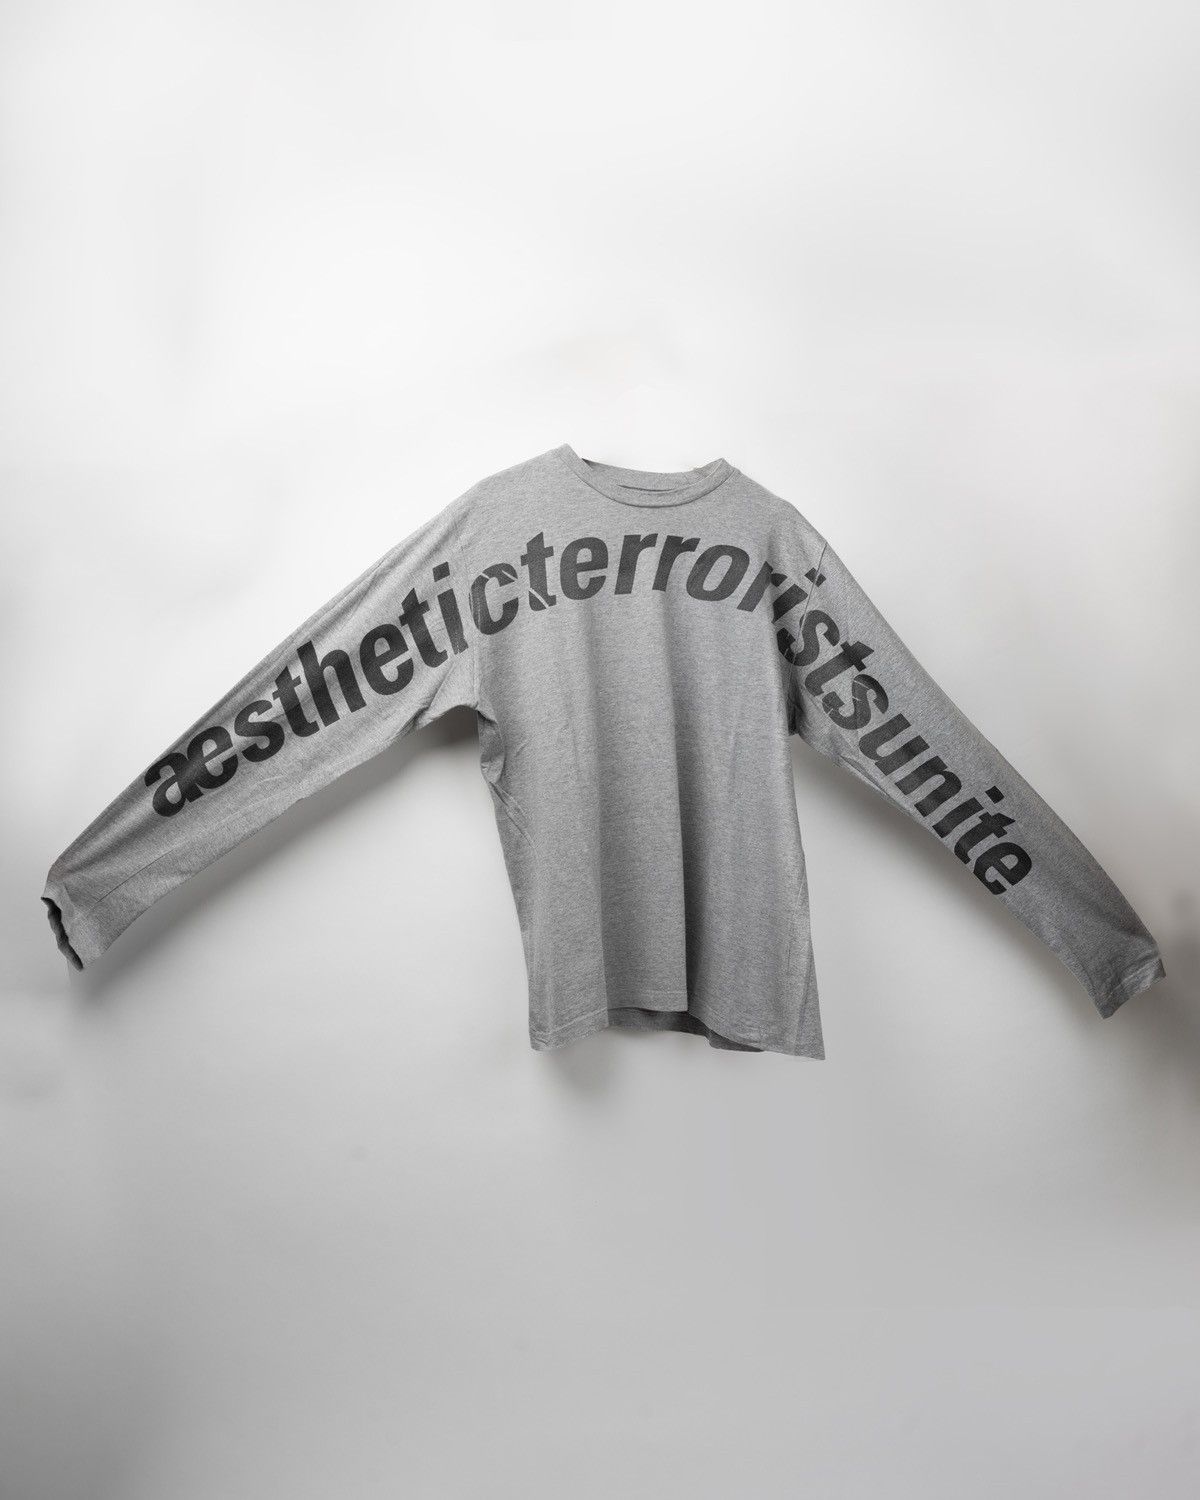 Aesthetic Terrorists By Walter | Grailed